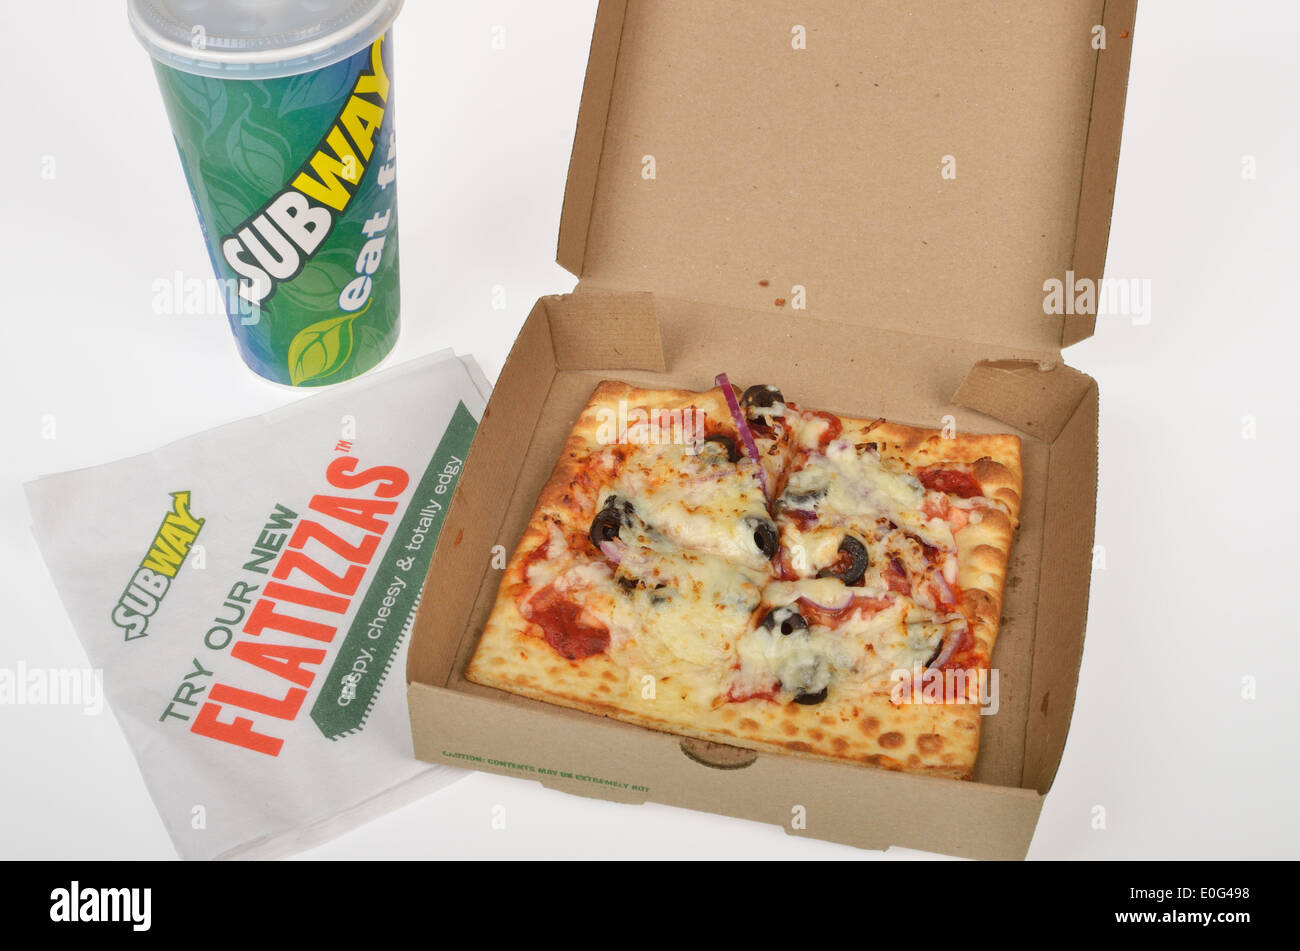 Subway fast food flatizza square pizza with vegetable toppings in cardboard take out box on white background. USA Stock Photo